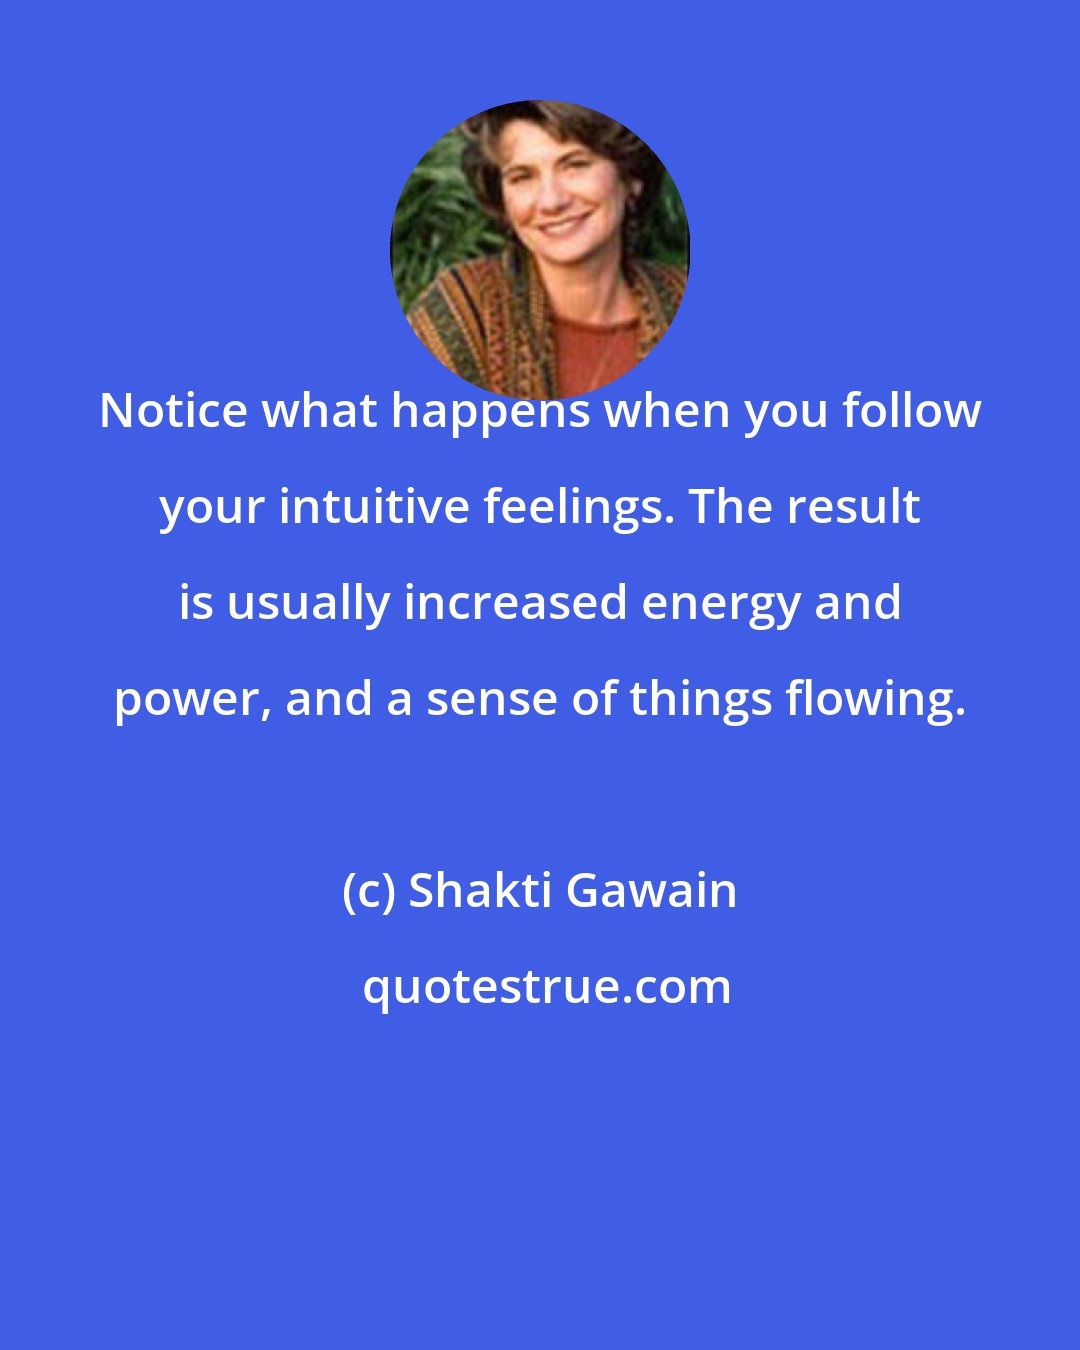 Shakti Gawain: Notice what happens when you follow your intuitive feelings. The result is usually increased energy and power, and a sense of things flowing.